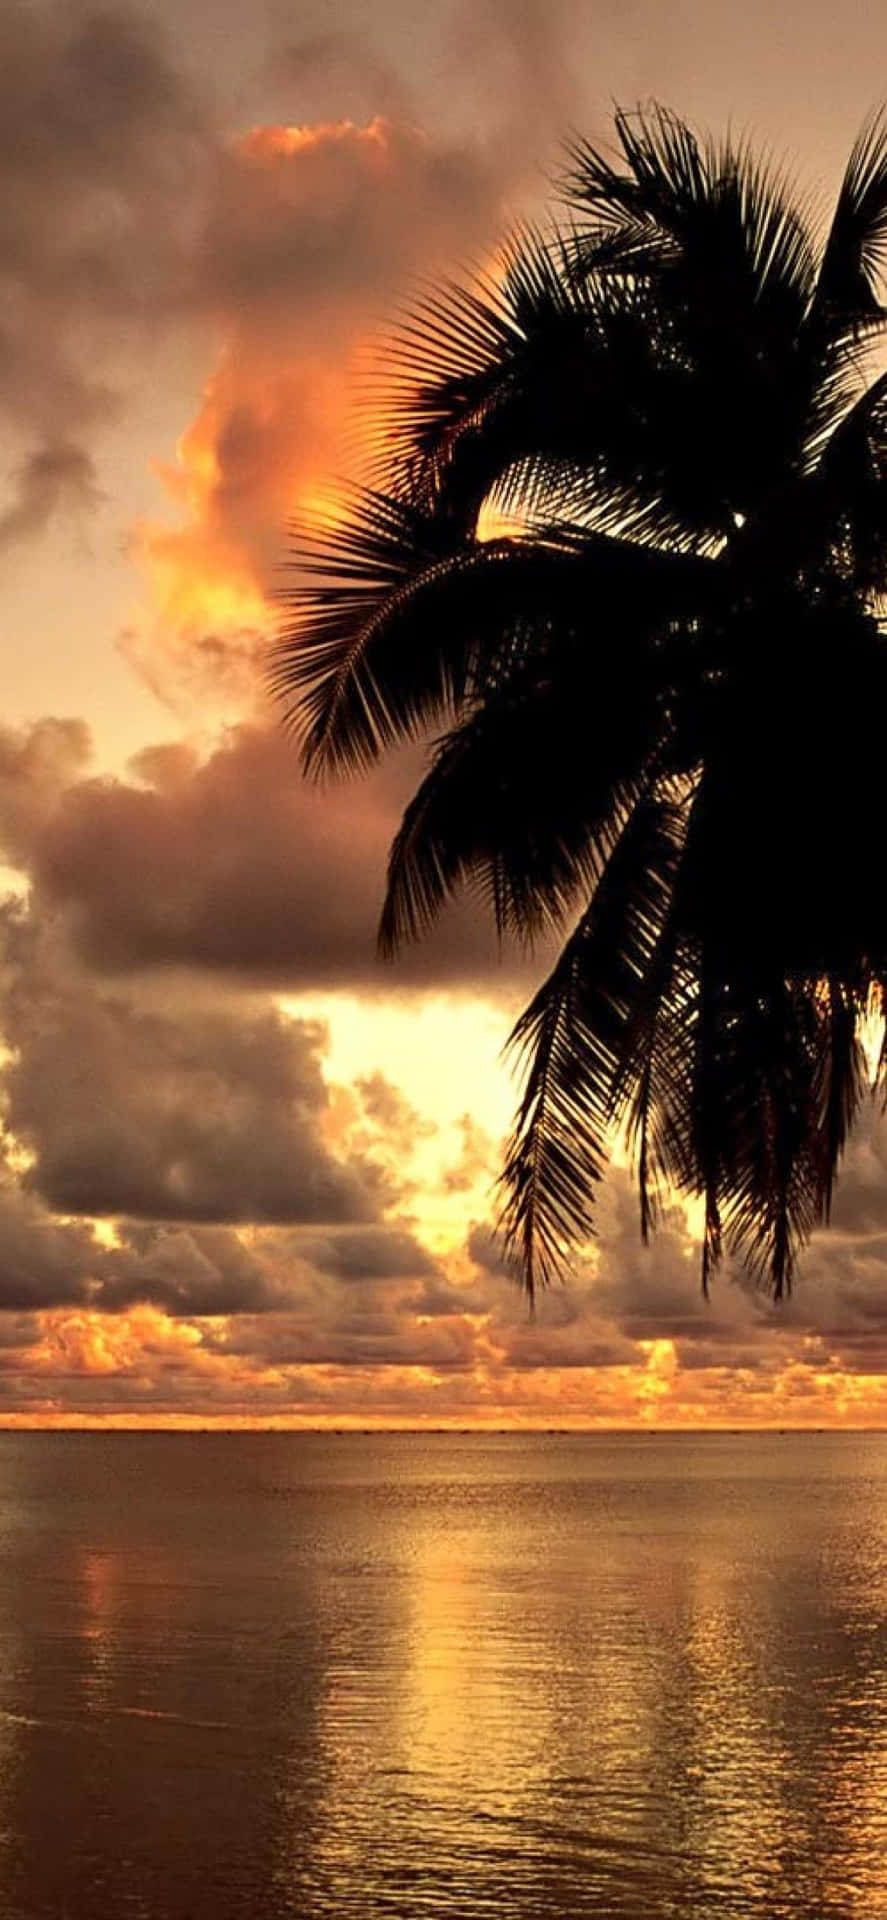 Enjoy the beauty of Hawaii with your trusty iPhone Wallpaper